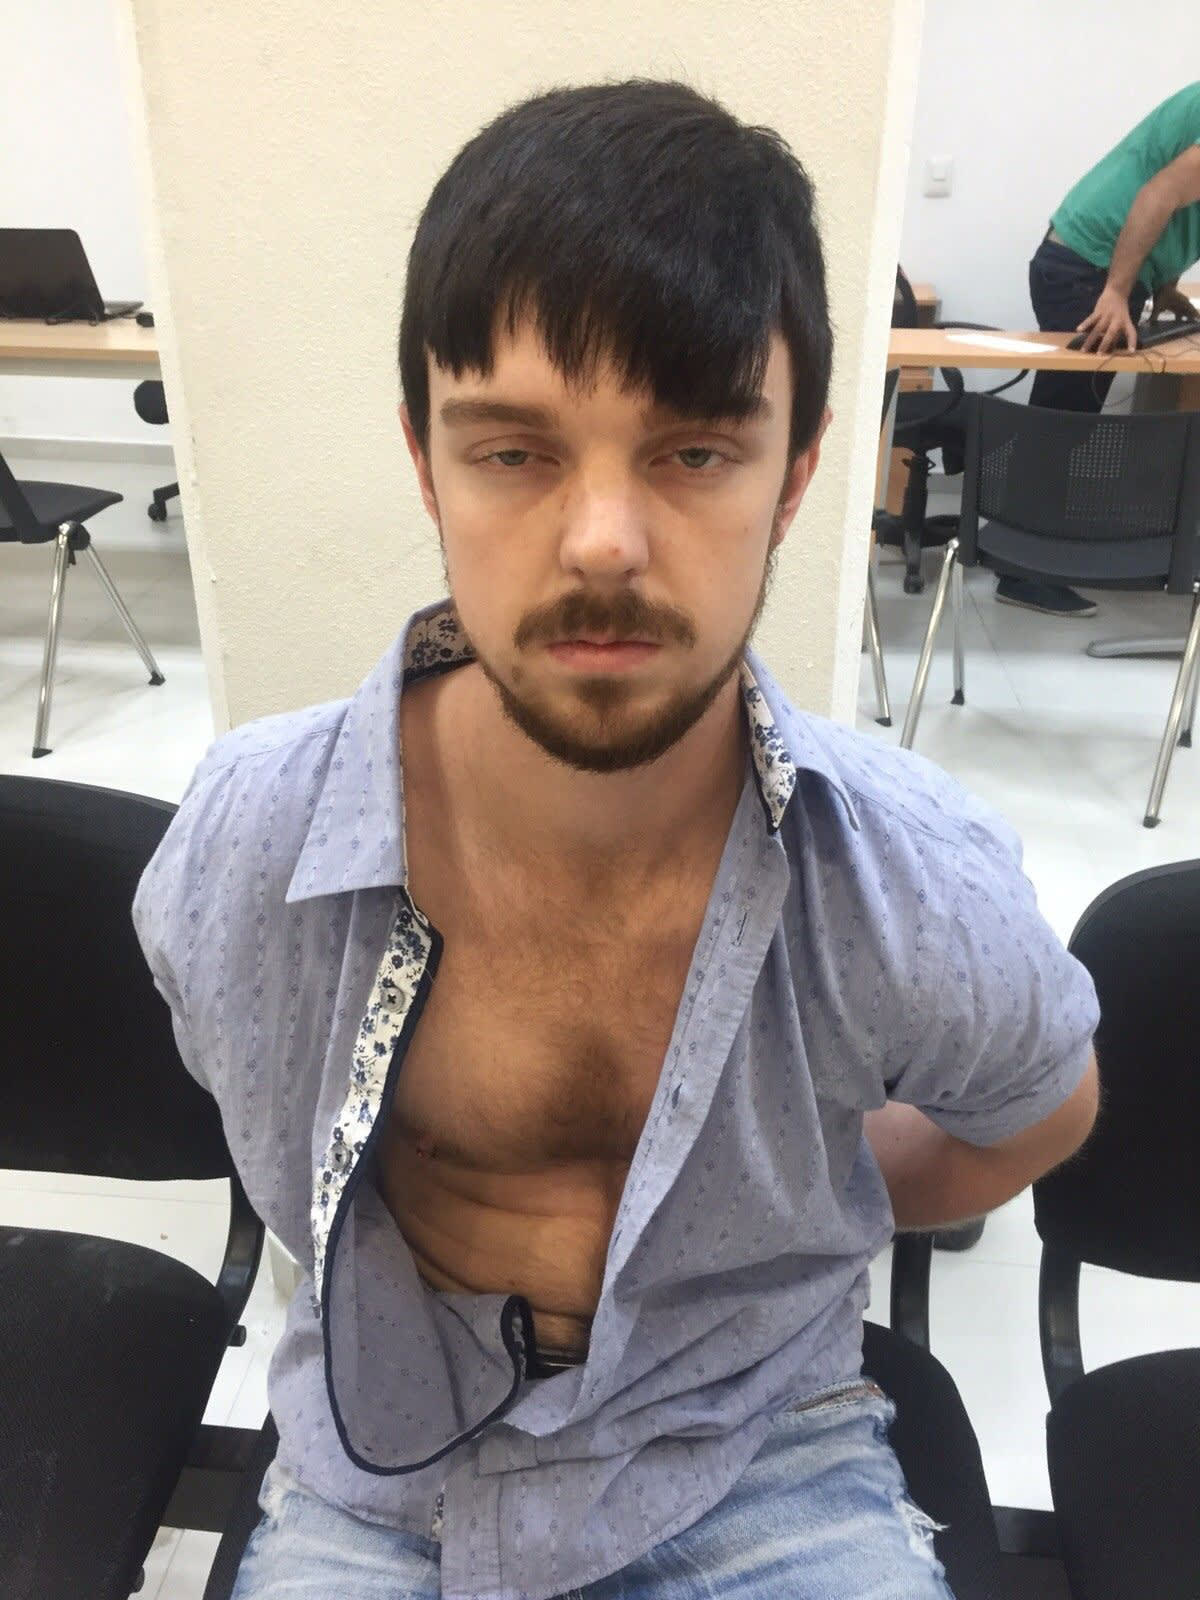 What's Going to Happen to 'Affluenza' Teen Ethan Couch and His Mom?